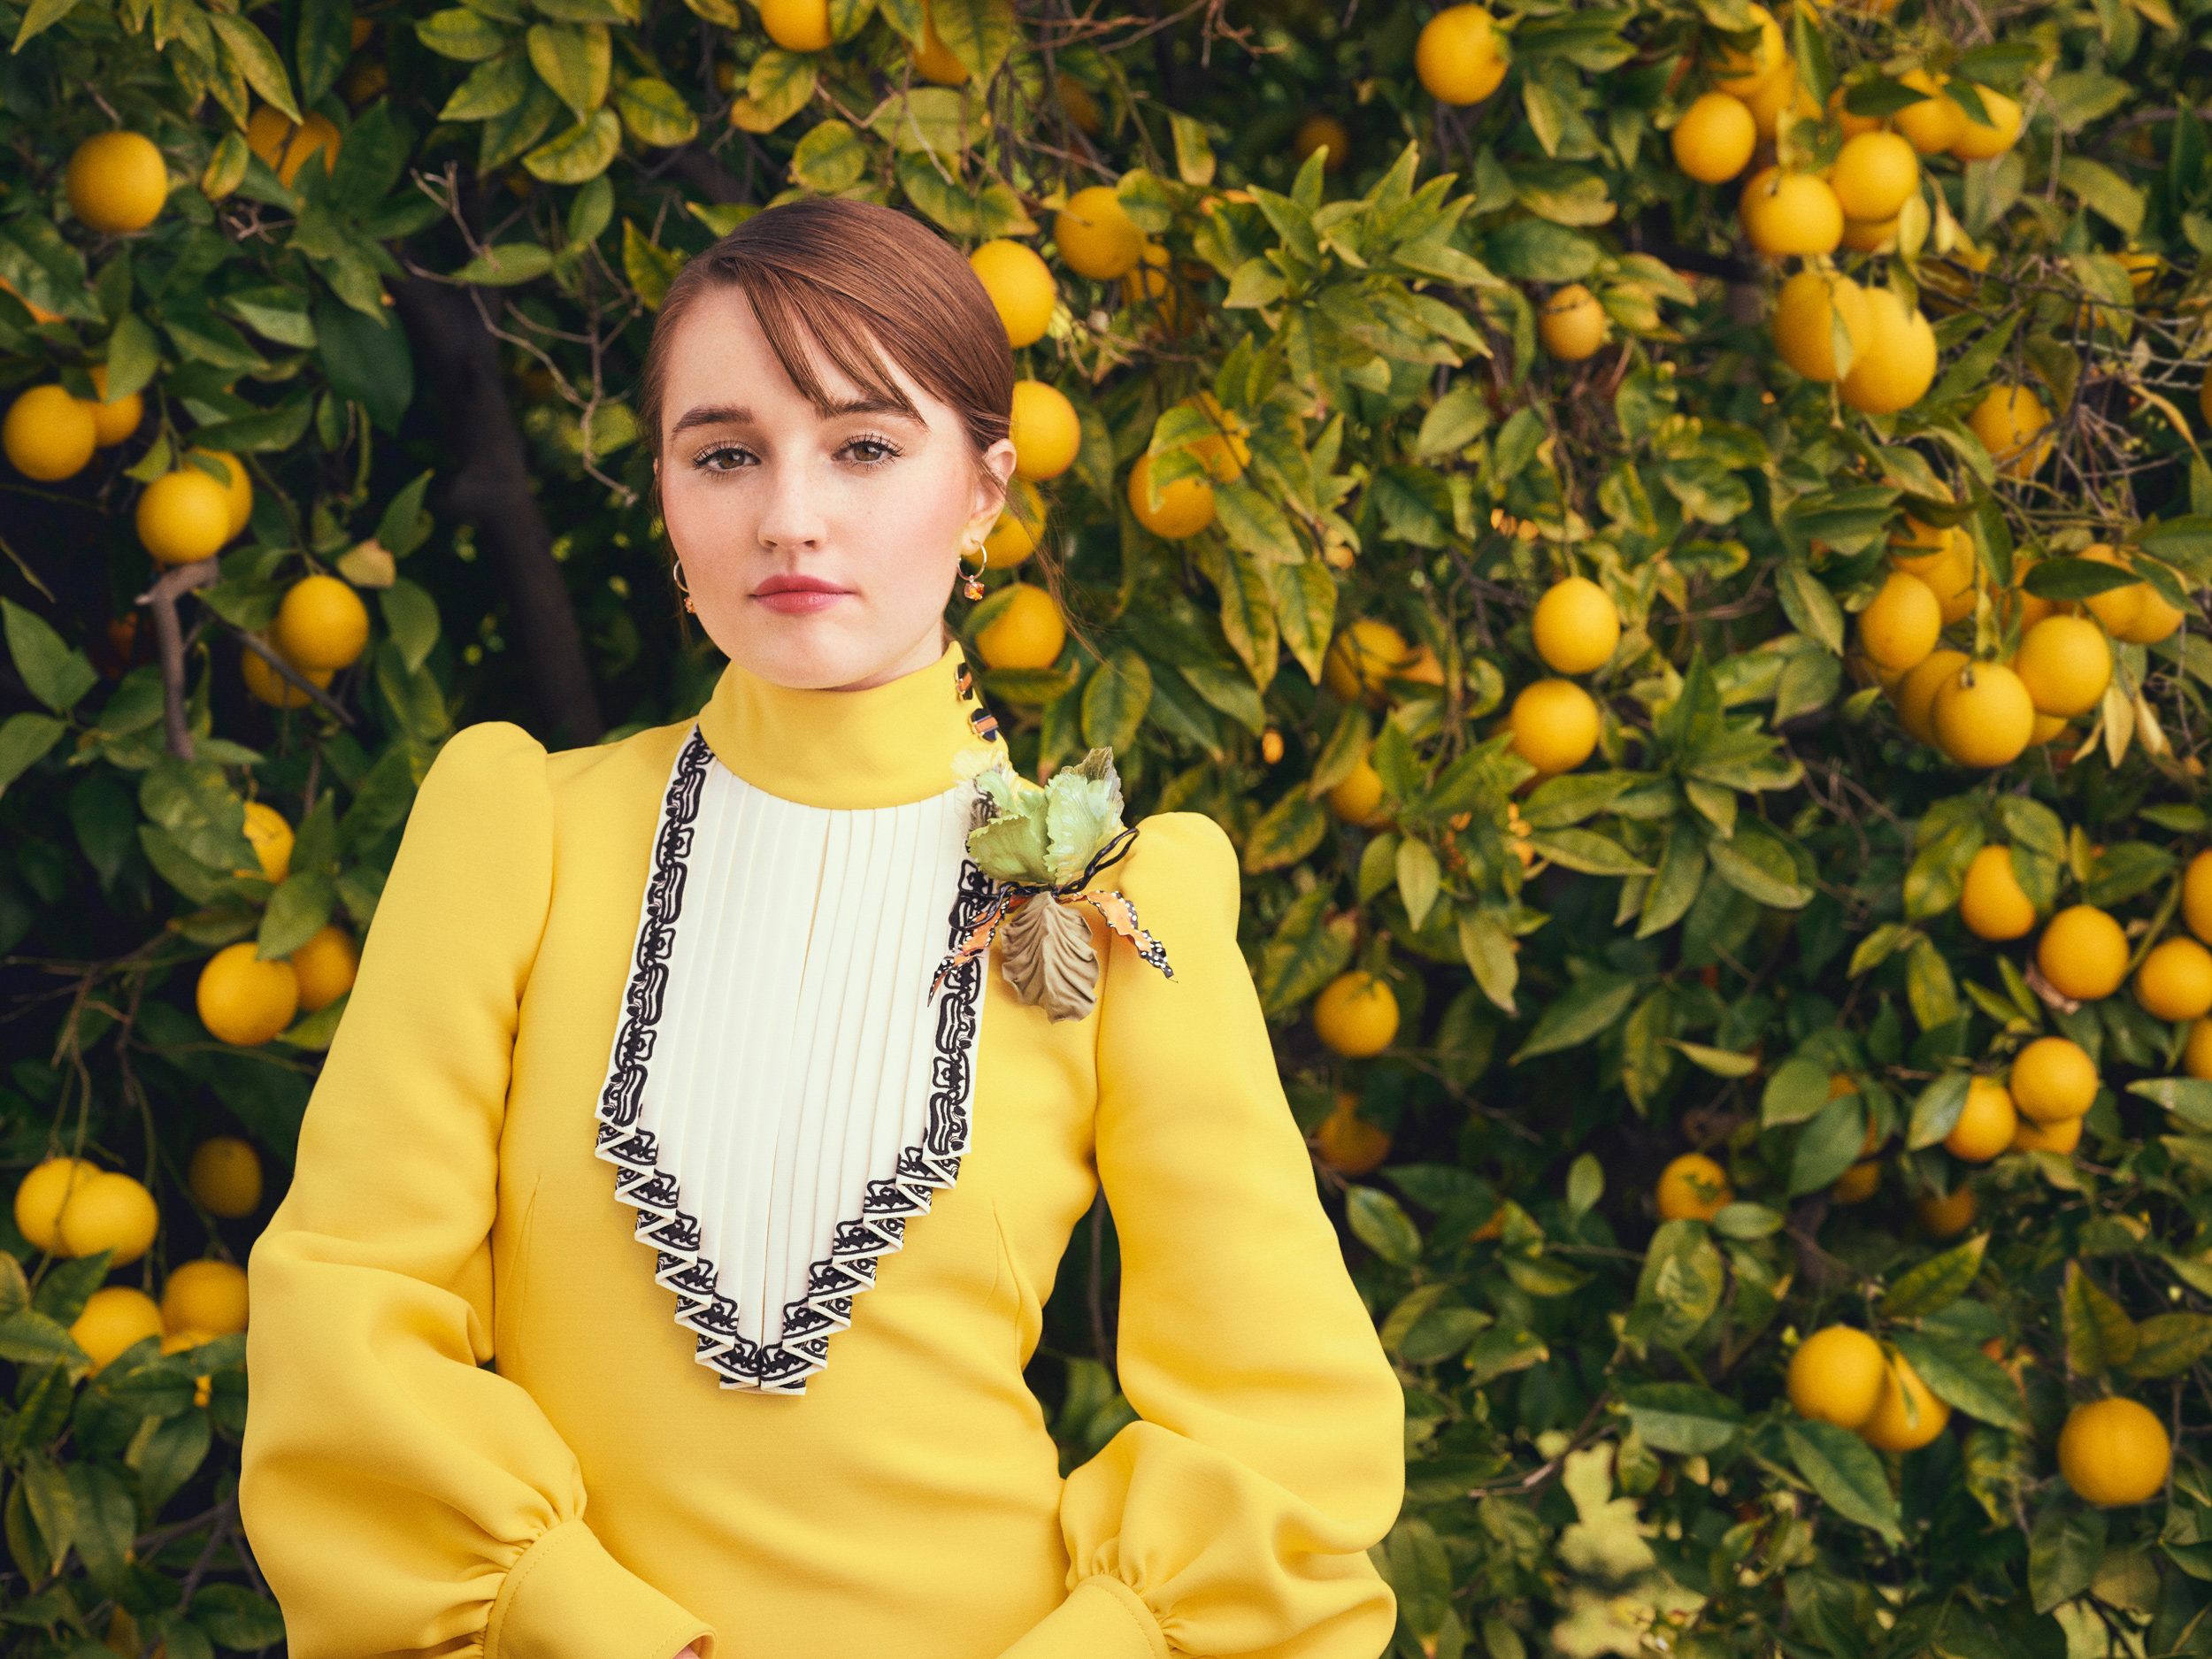 Actress Kaitlyn Dever wears a yellow dress as she stands in front of an orange tree full of fruit.